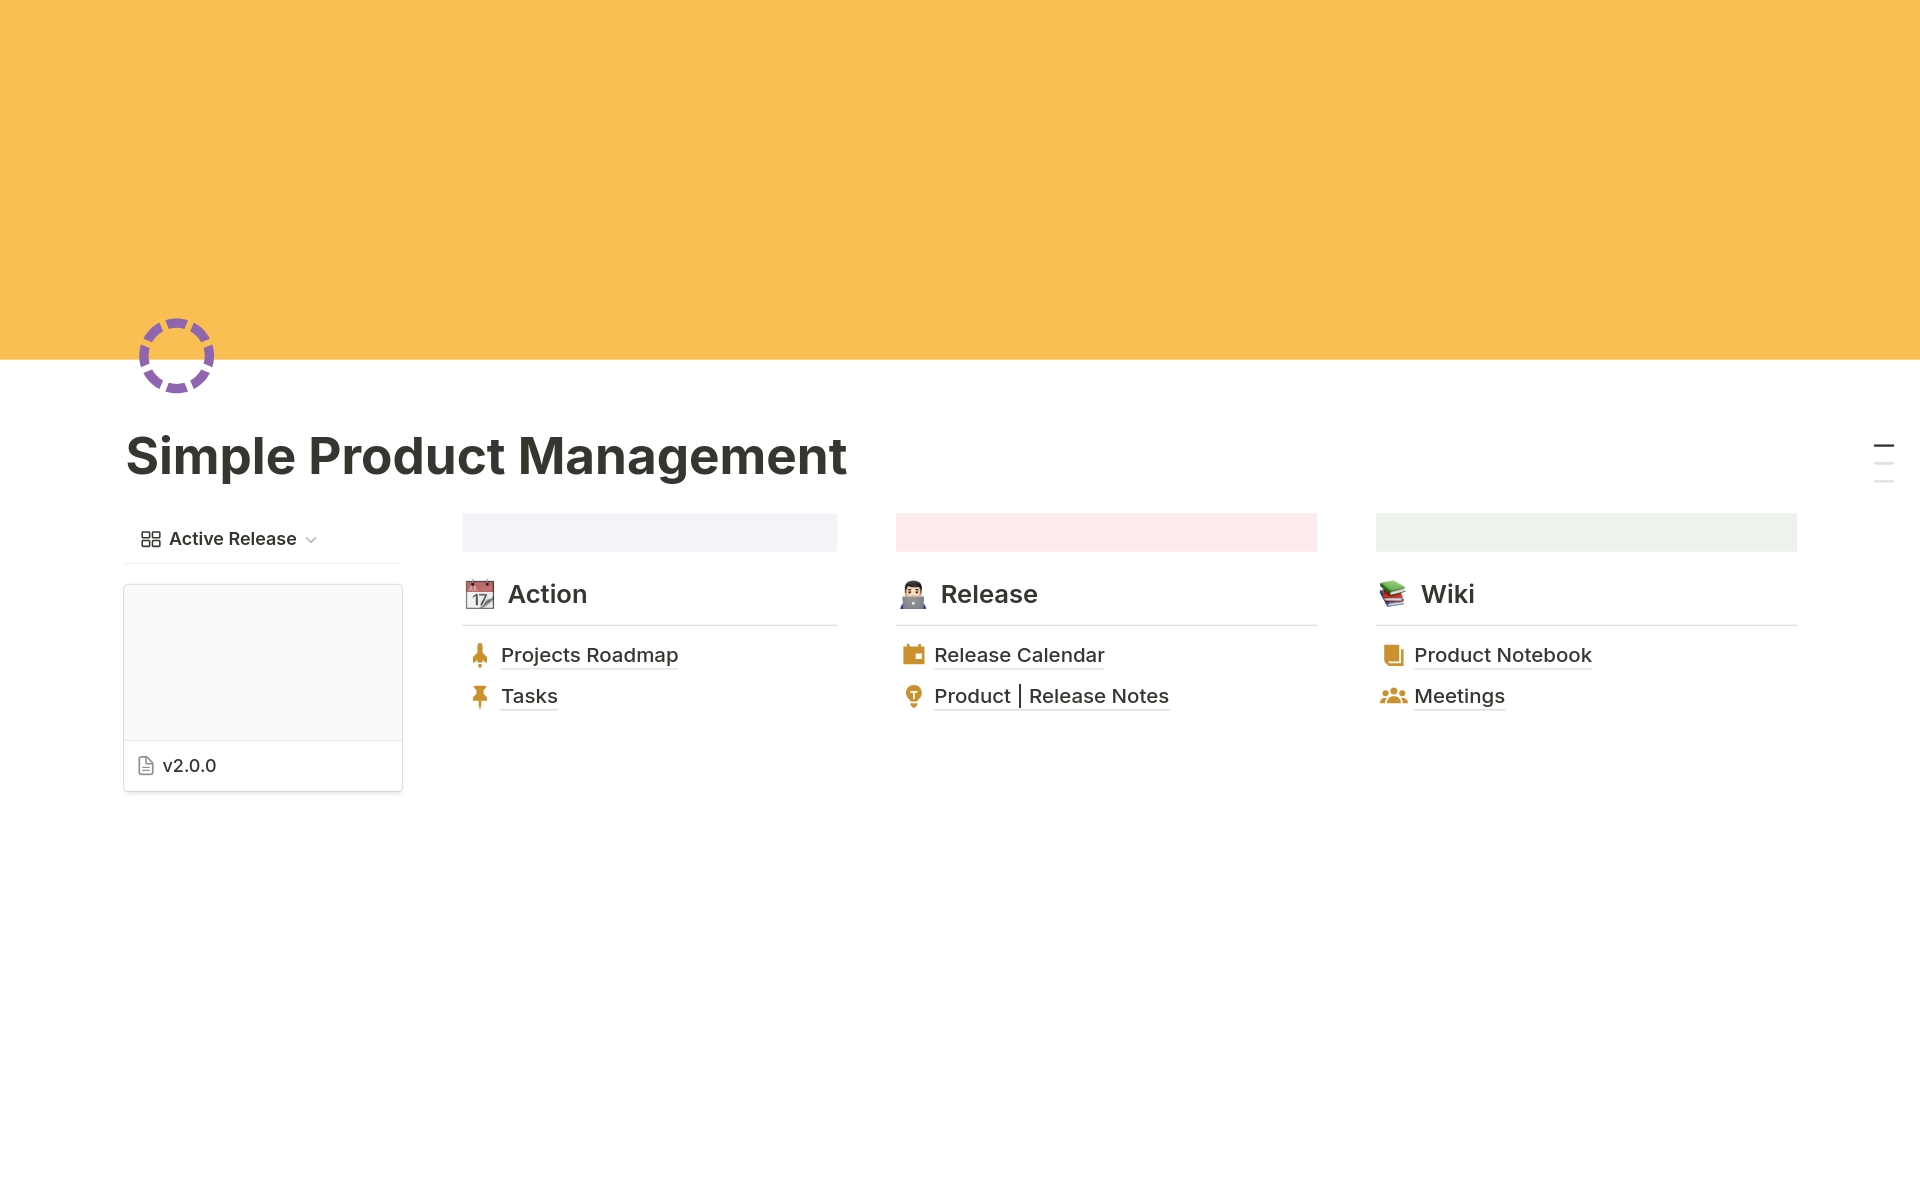 A simple product management for small teams that just works.